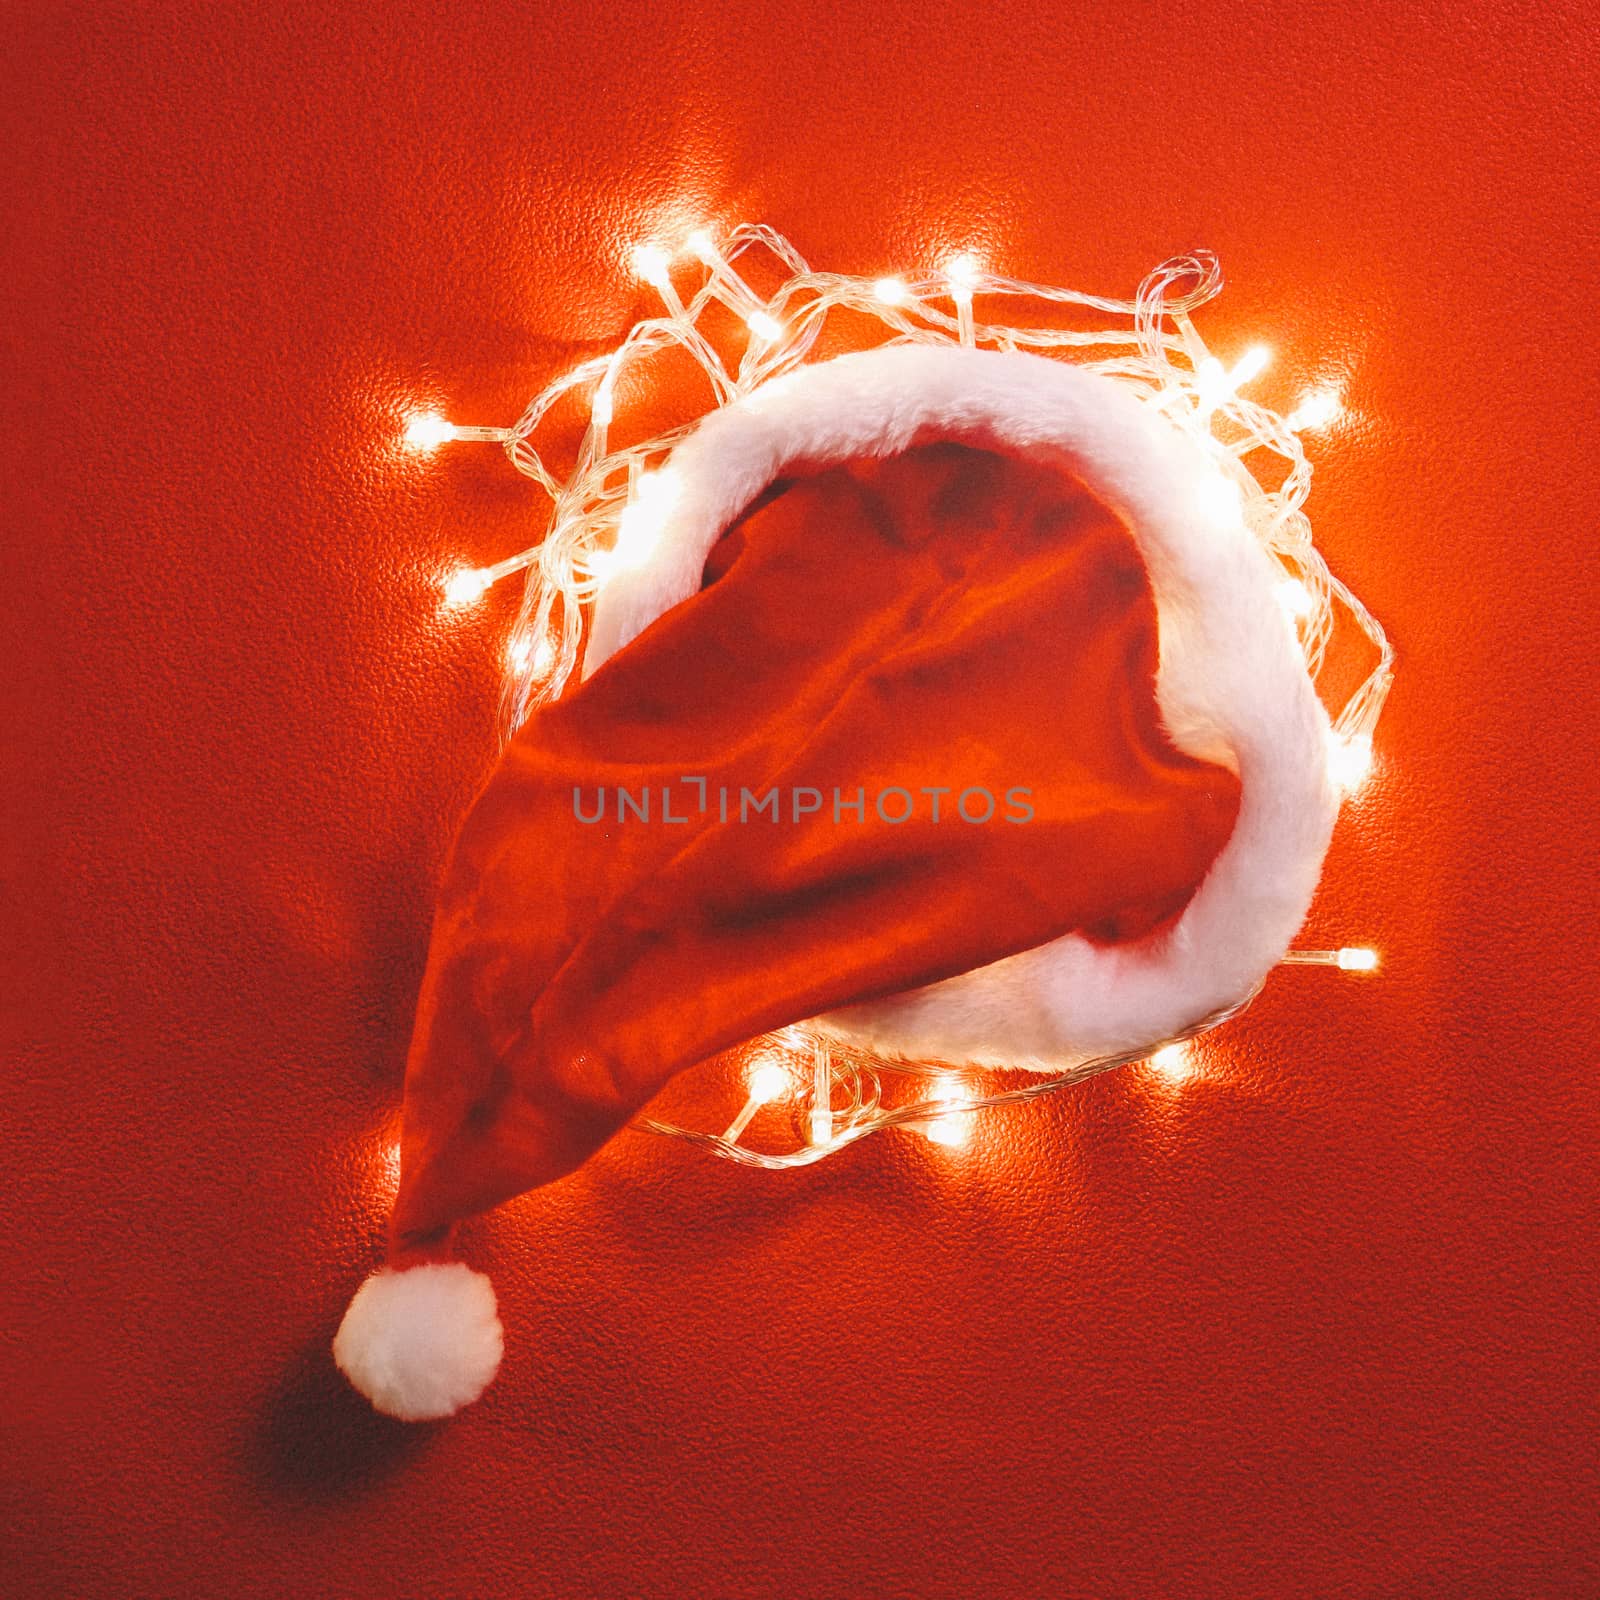 Greeting Season concept.Santa Claus hat with christmas light on red and green background